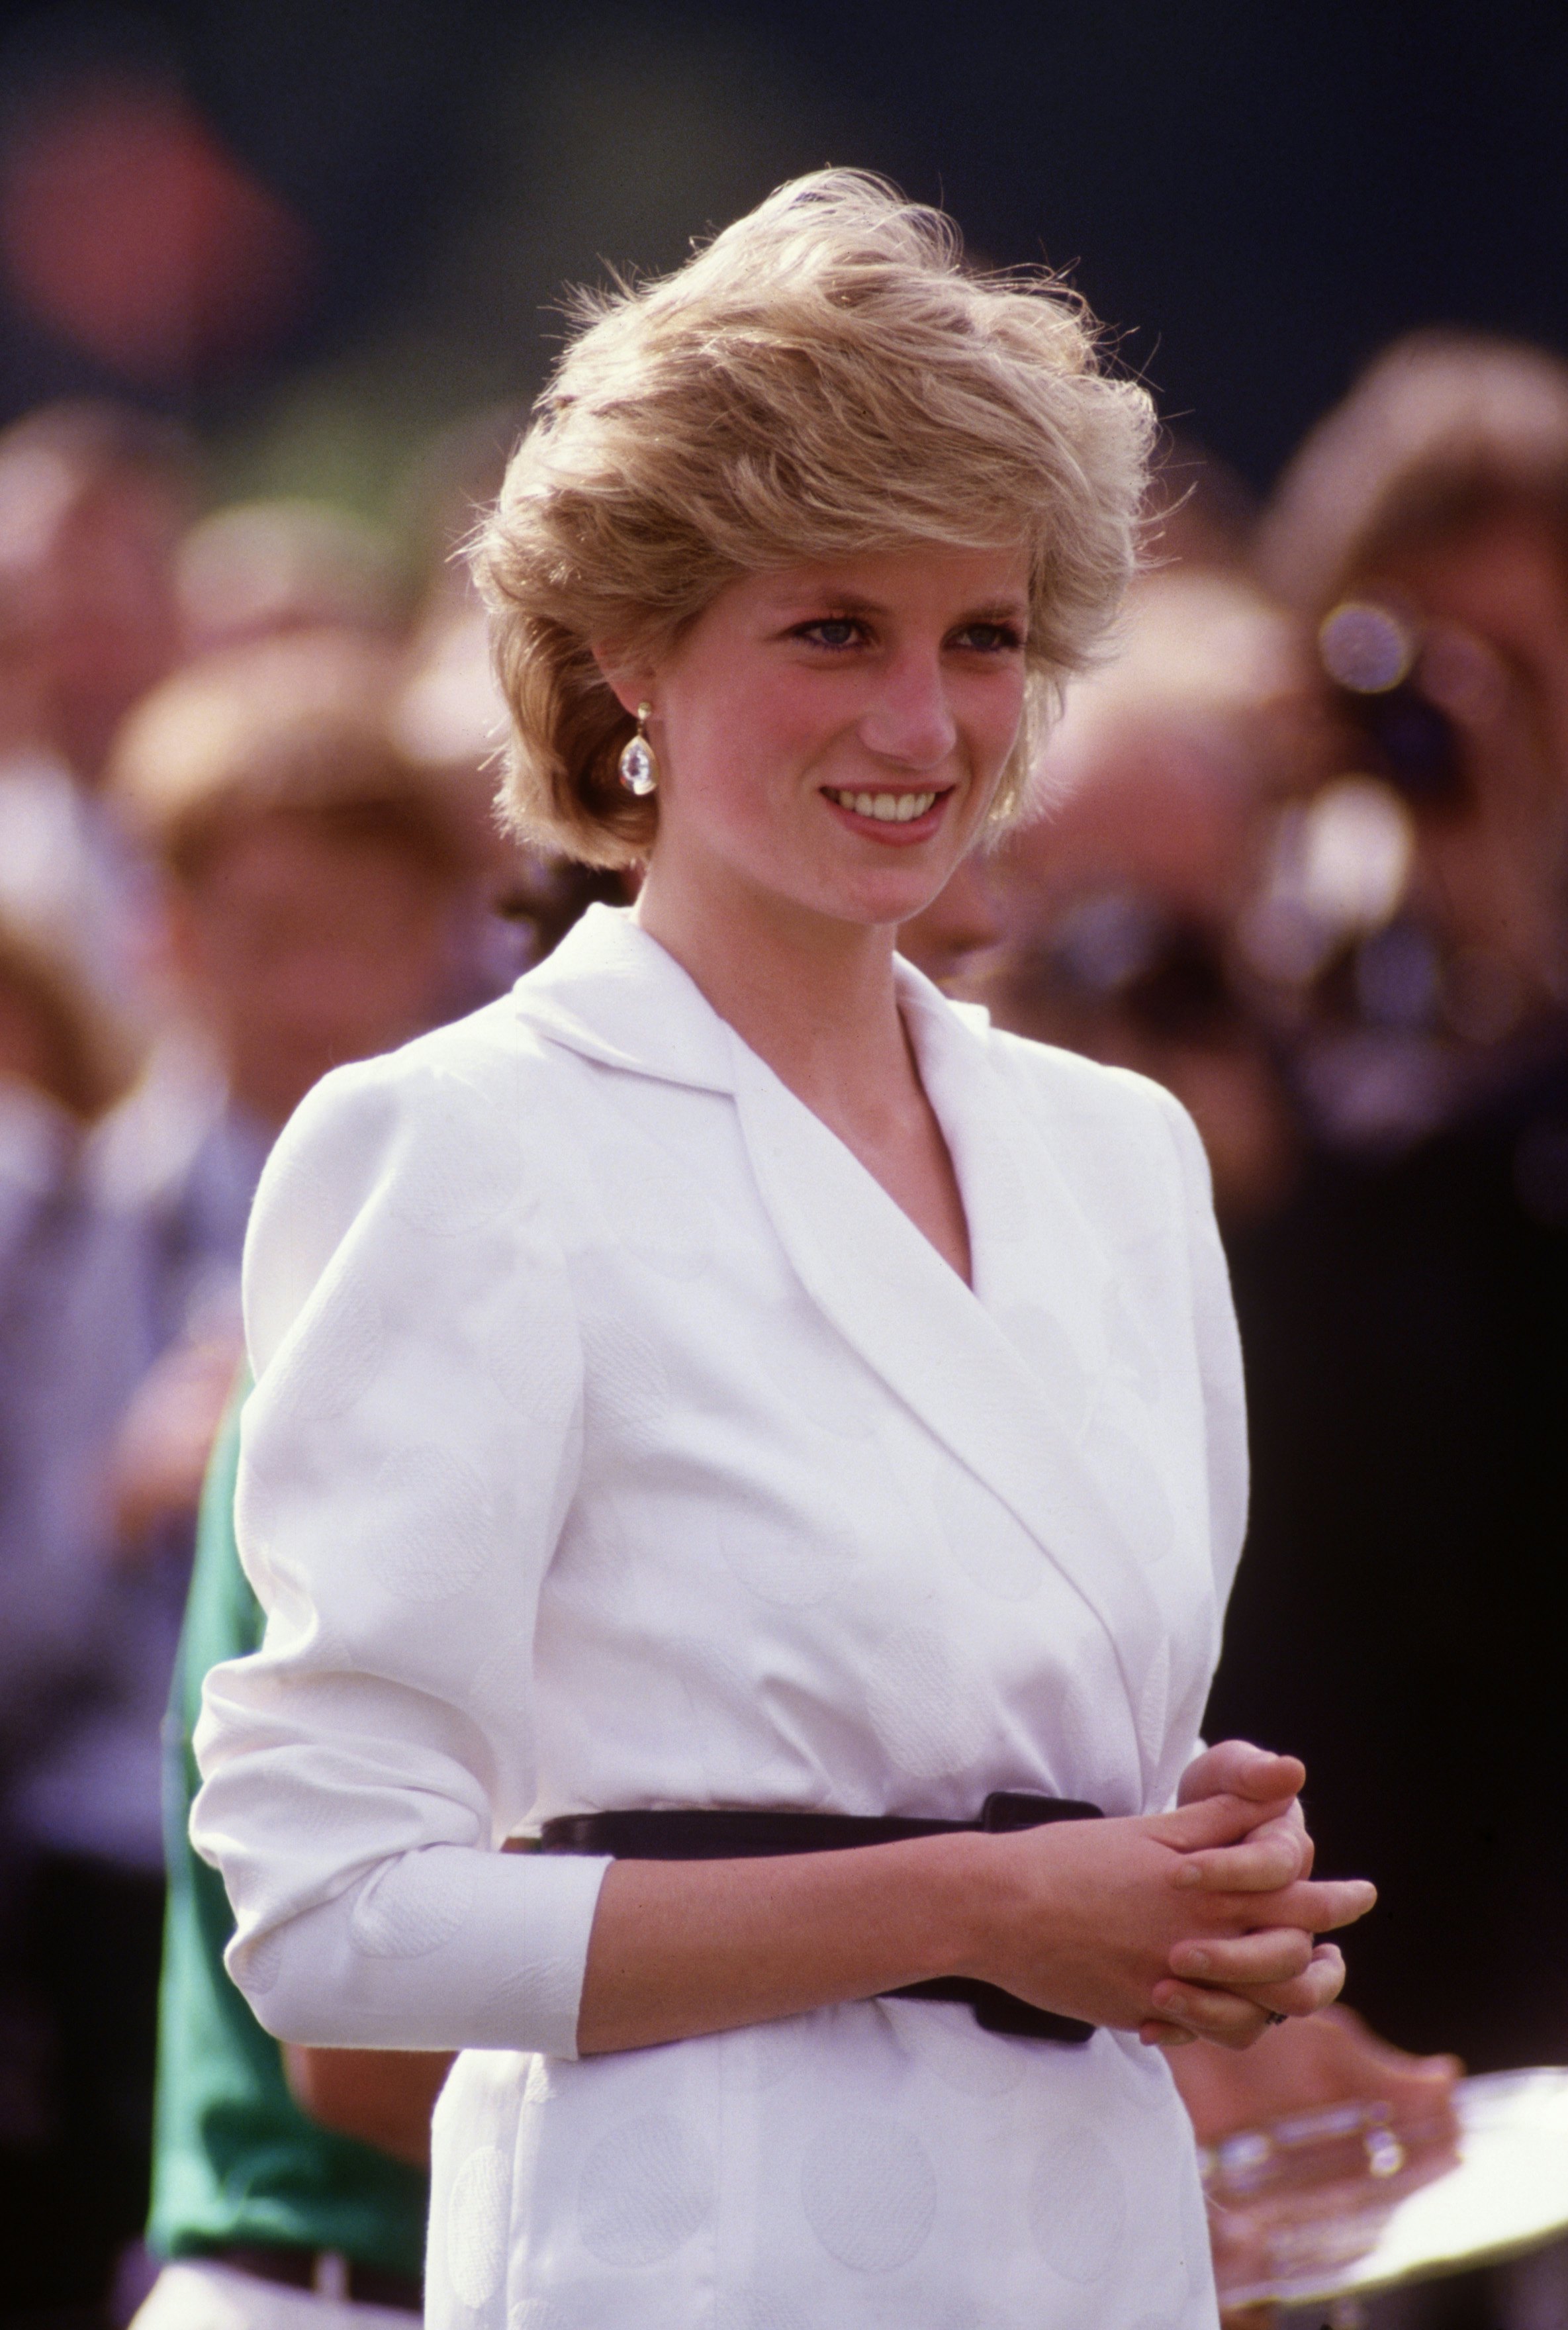 The 'Modern Princess Diana Bob' Is Here. Is It Best Left in the Past?